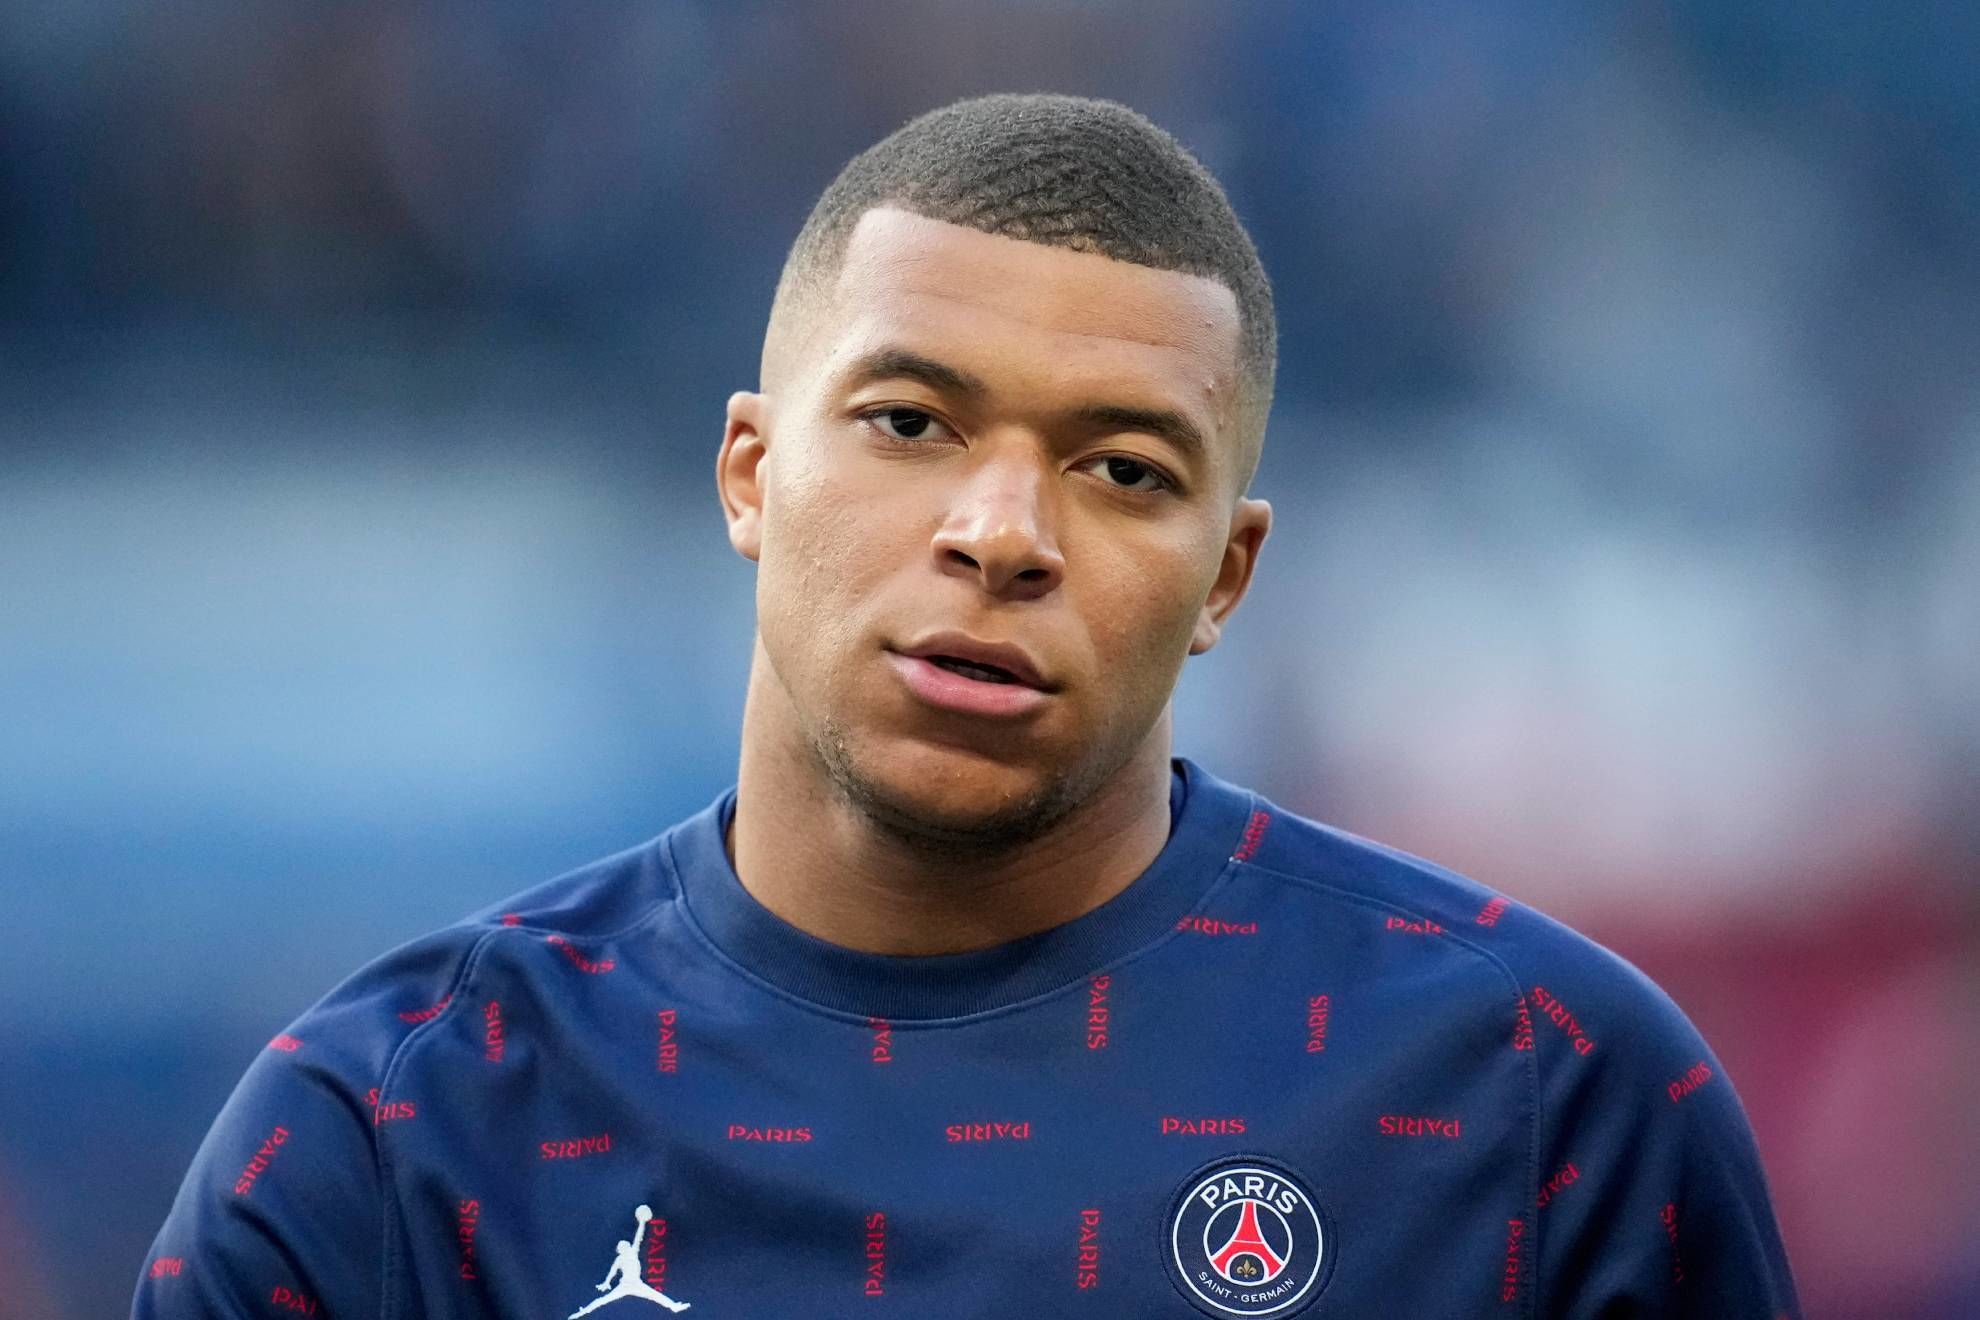 Real Madrid will try to buy Mbappe from PSG for €150m in summer 2023